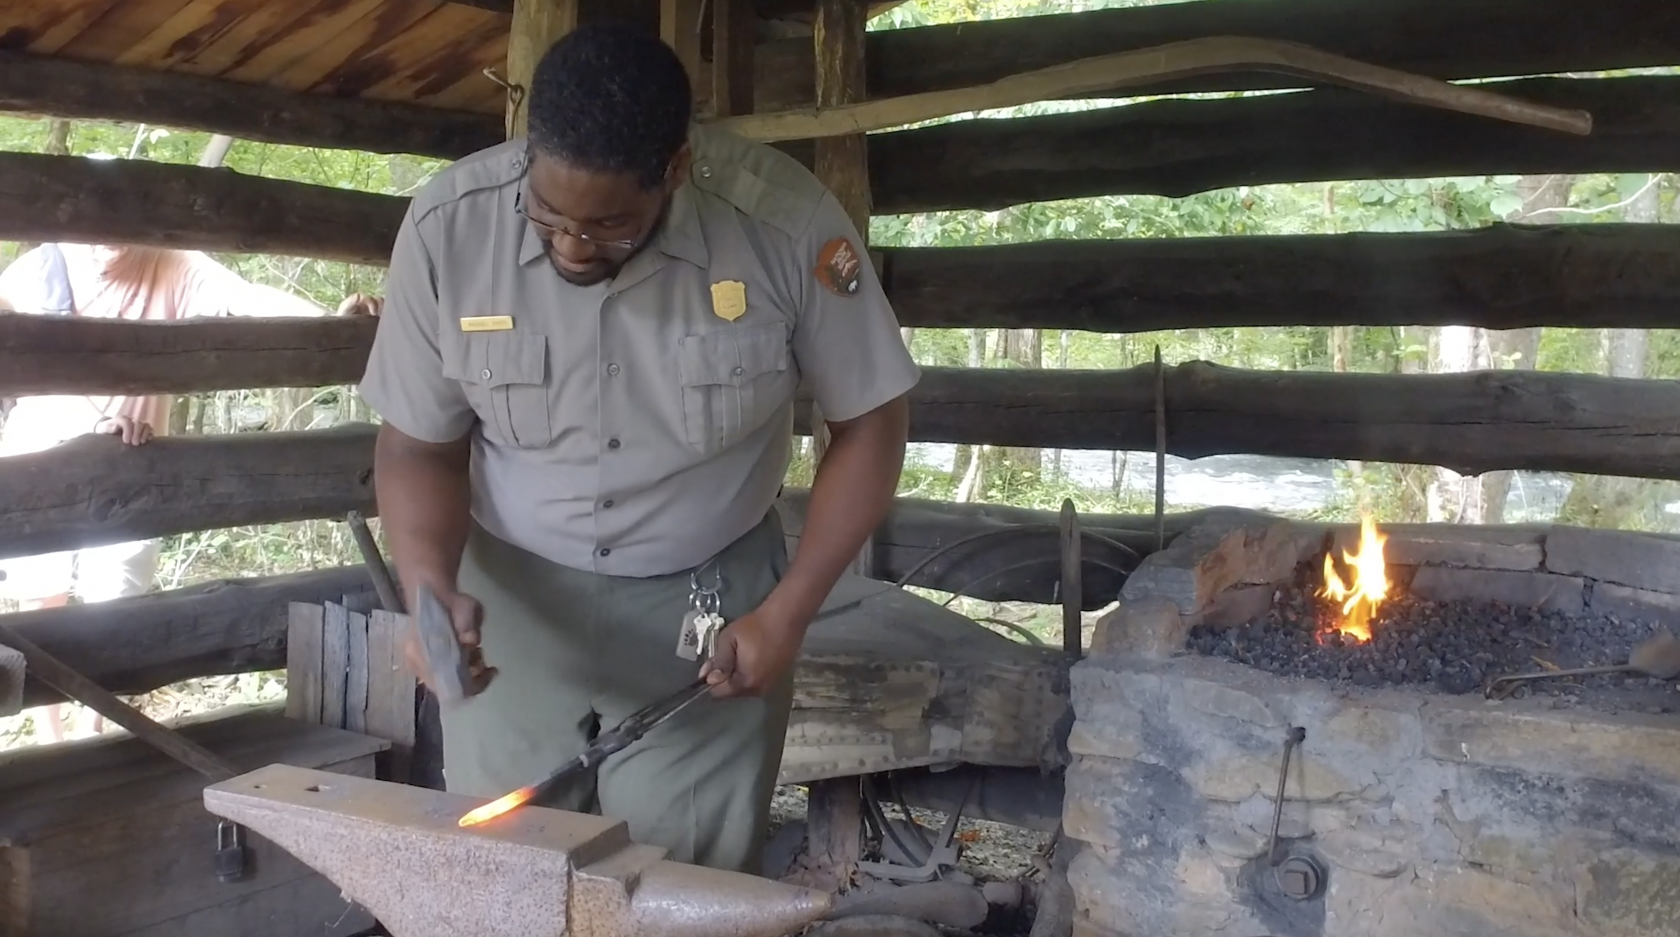 Michael Smith does a blacksmith shop demonstration, showing how metal is forged